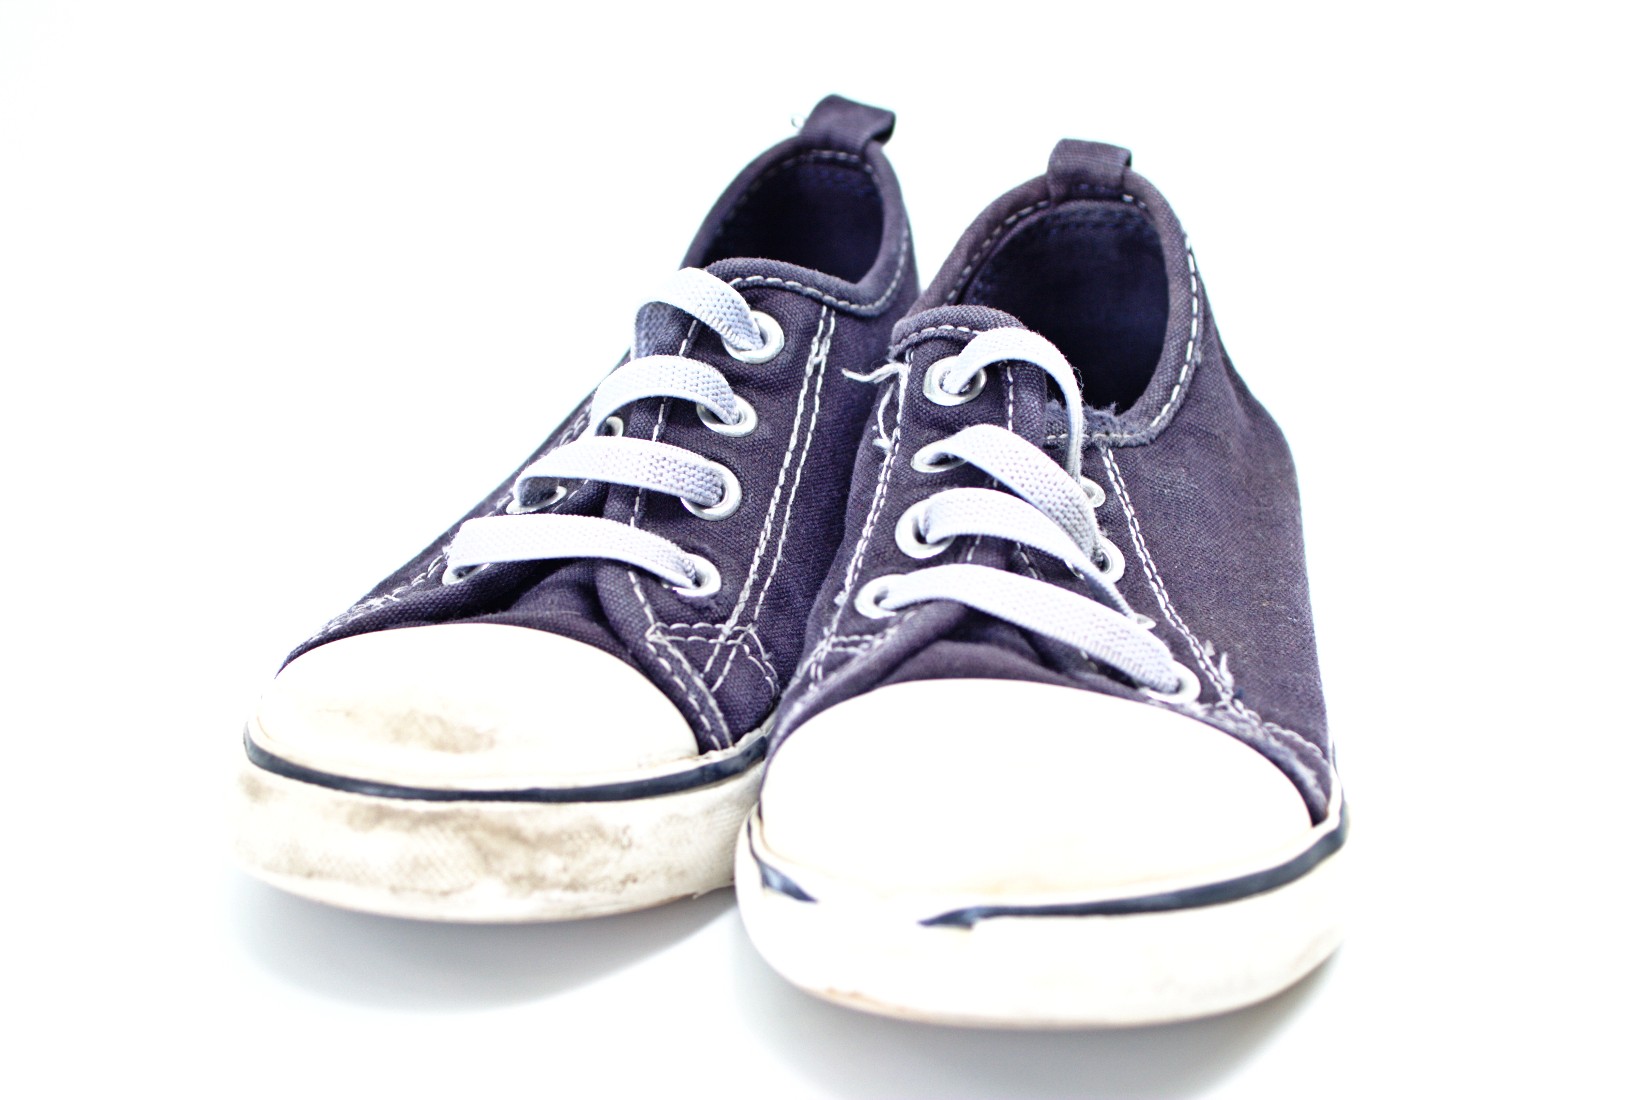 Pair of blue and white sneakers photo